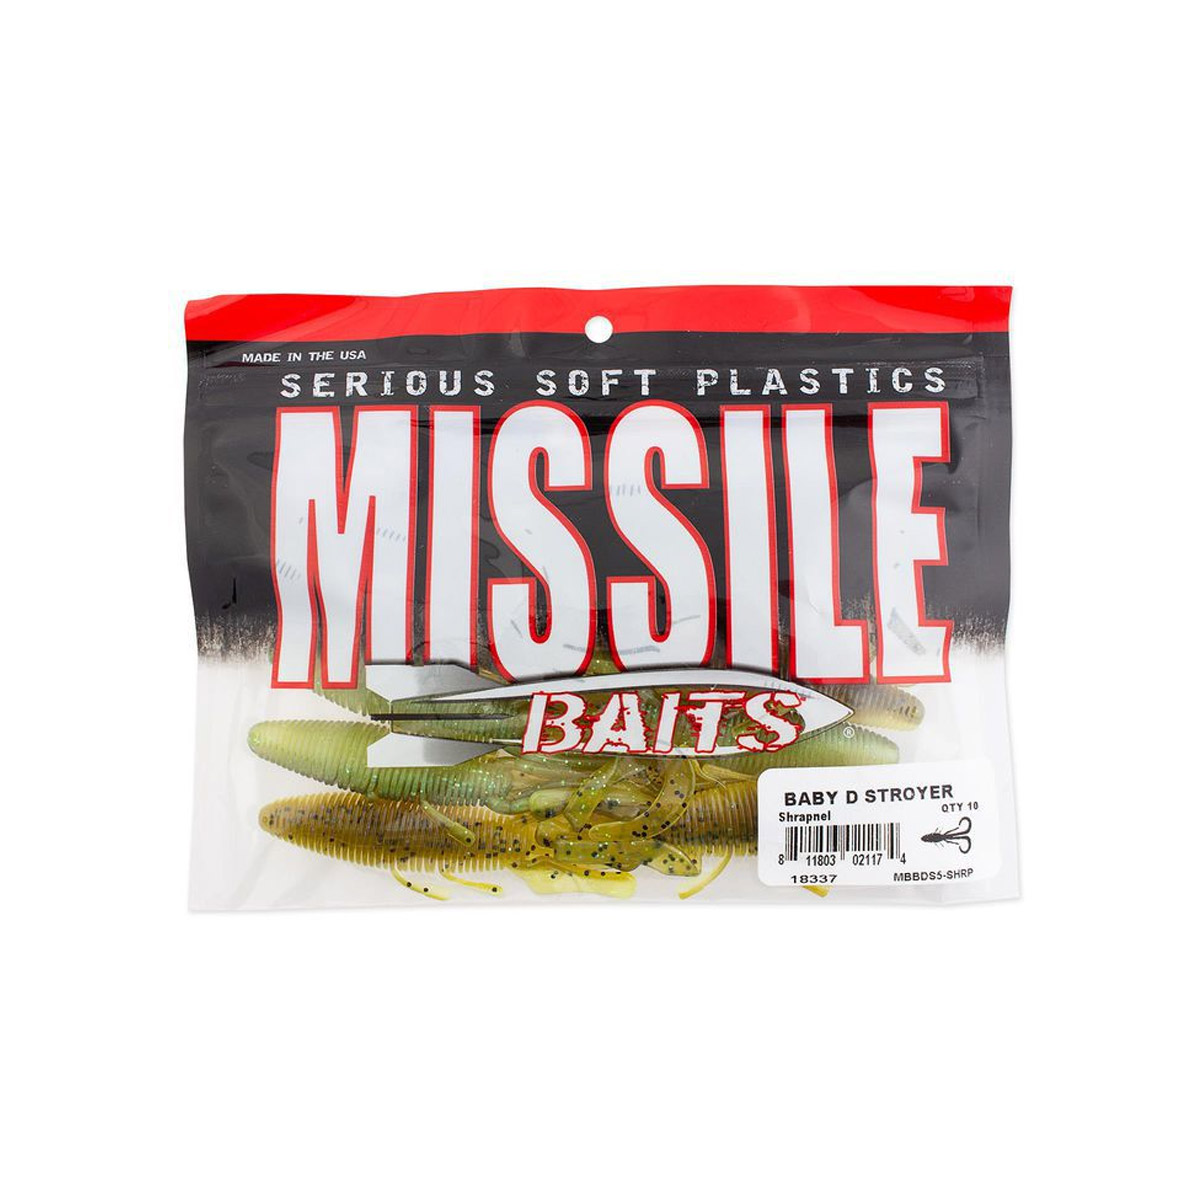 Missile baits Baby D Stroyer 5 Inch